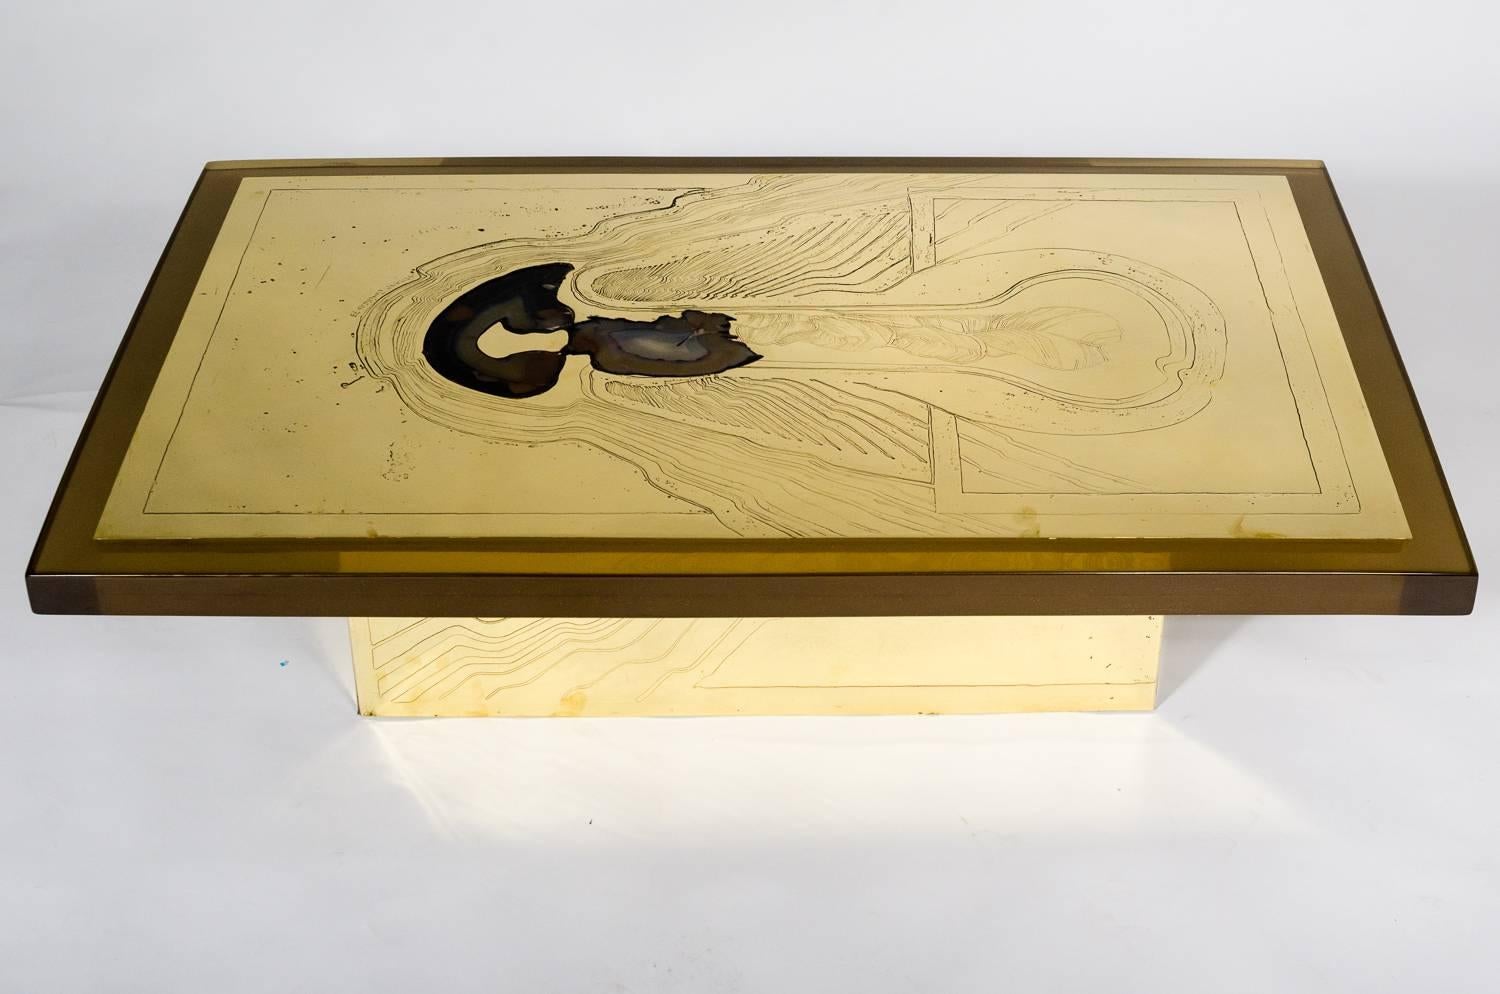 Engraved etched brass coffee table designed by Armand Jonckers in 1973, with a resin surrounding an agate stone top. The table Stand is also etched with acid representing deep sea waves the table is lighted from the inside. This furniture has been